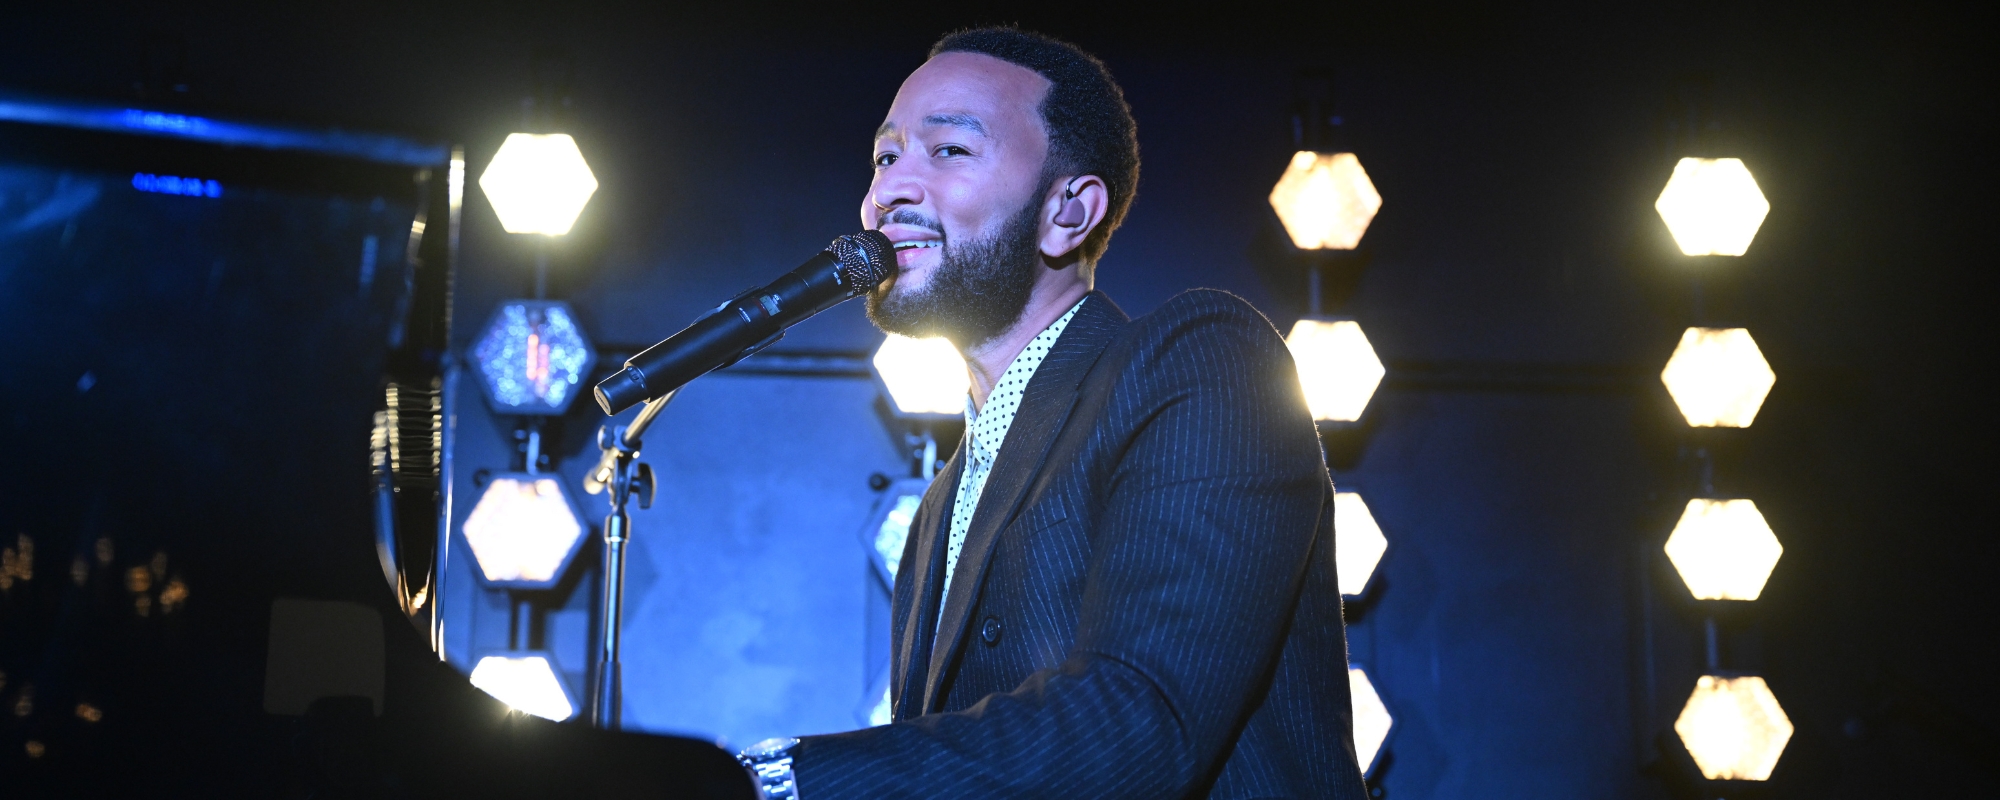 ‘The Voice’ Star John Legend Gives Soulful ‘Christmas at Graceland’ Performance